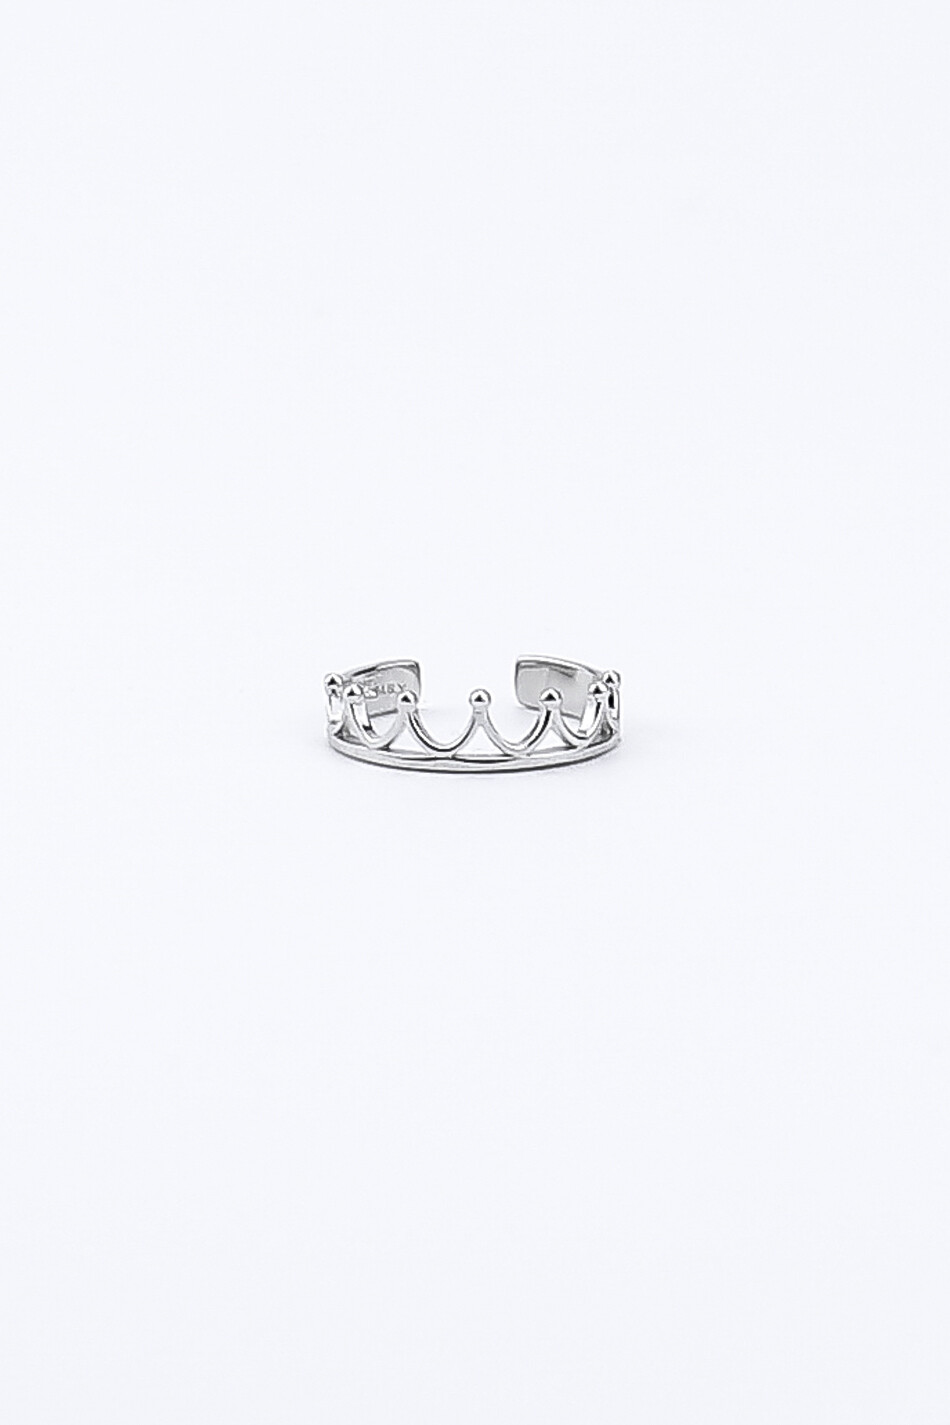 The "Crown" Ring